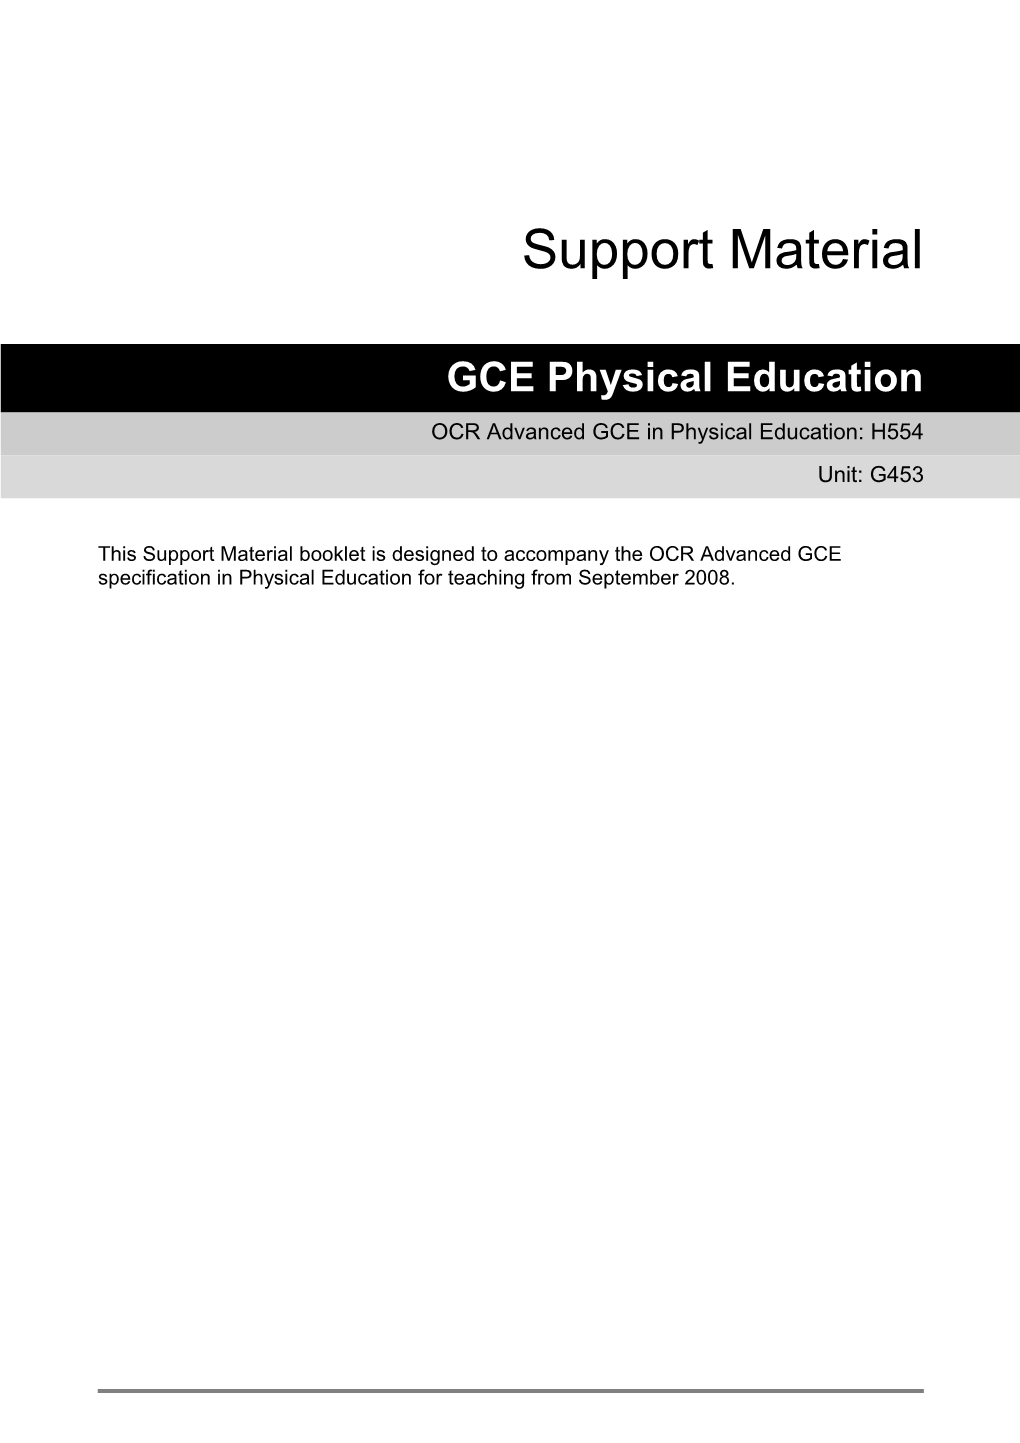 OCR Advanced GCE in Physical Education: H554